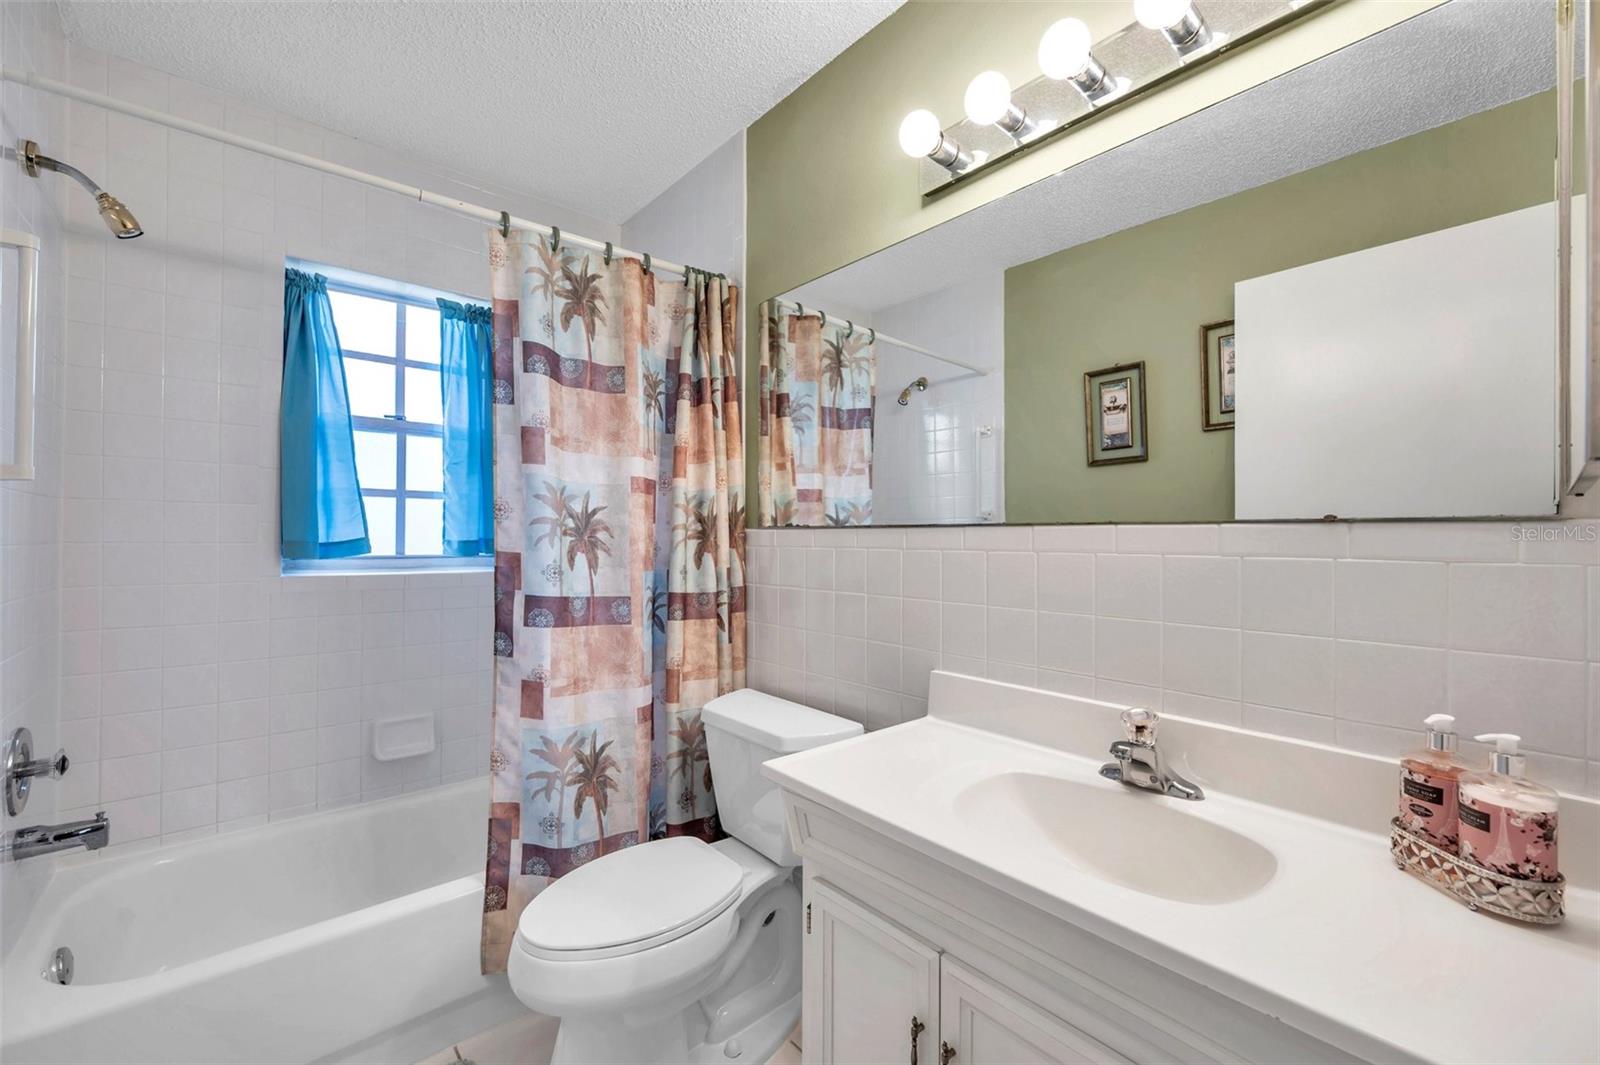 Guest bathroom has tub with shower, newer commode, newer vanity, ceramic tile floor and a nice window!